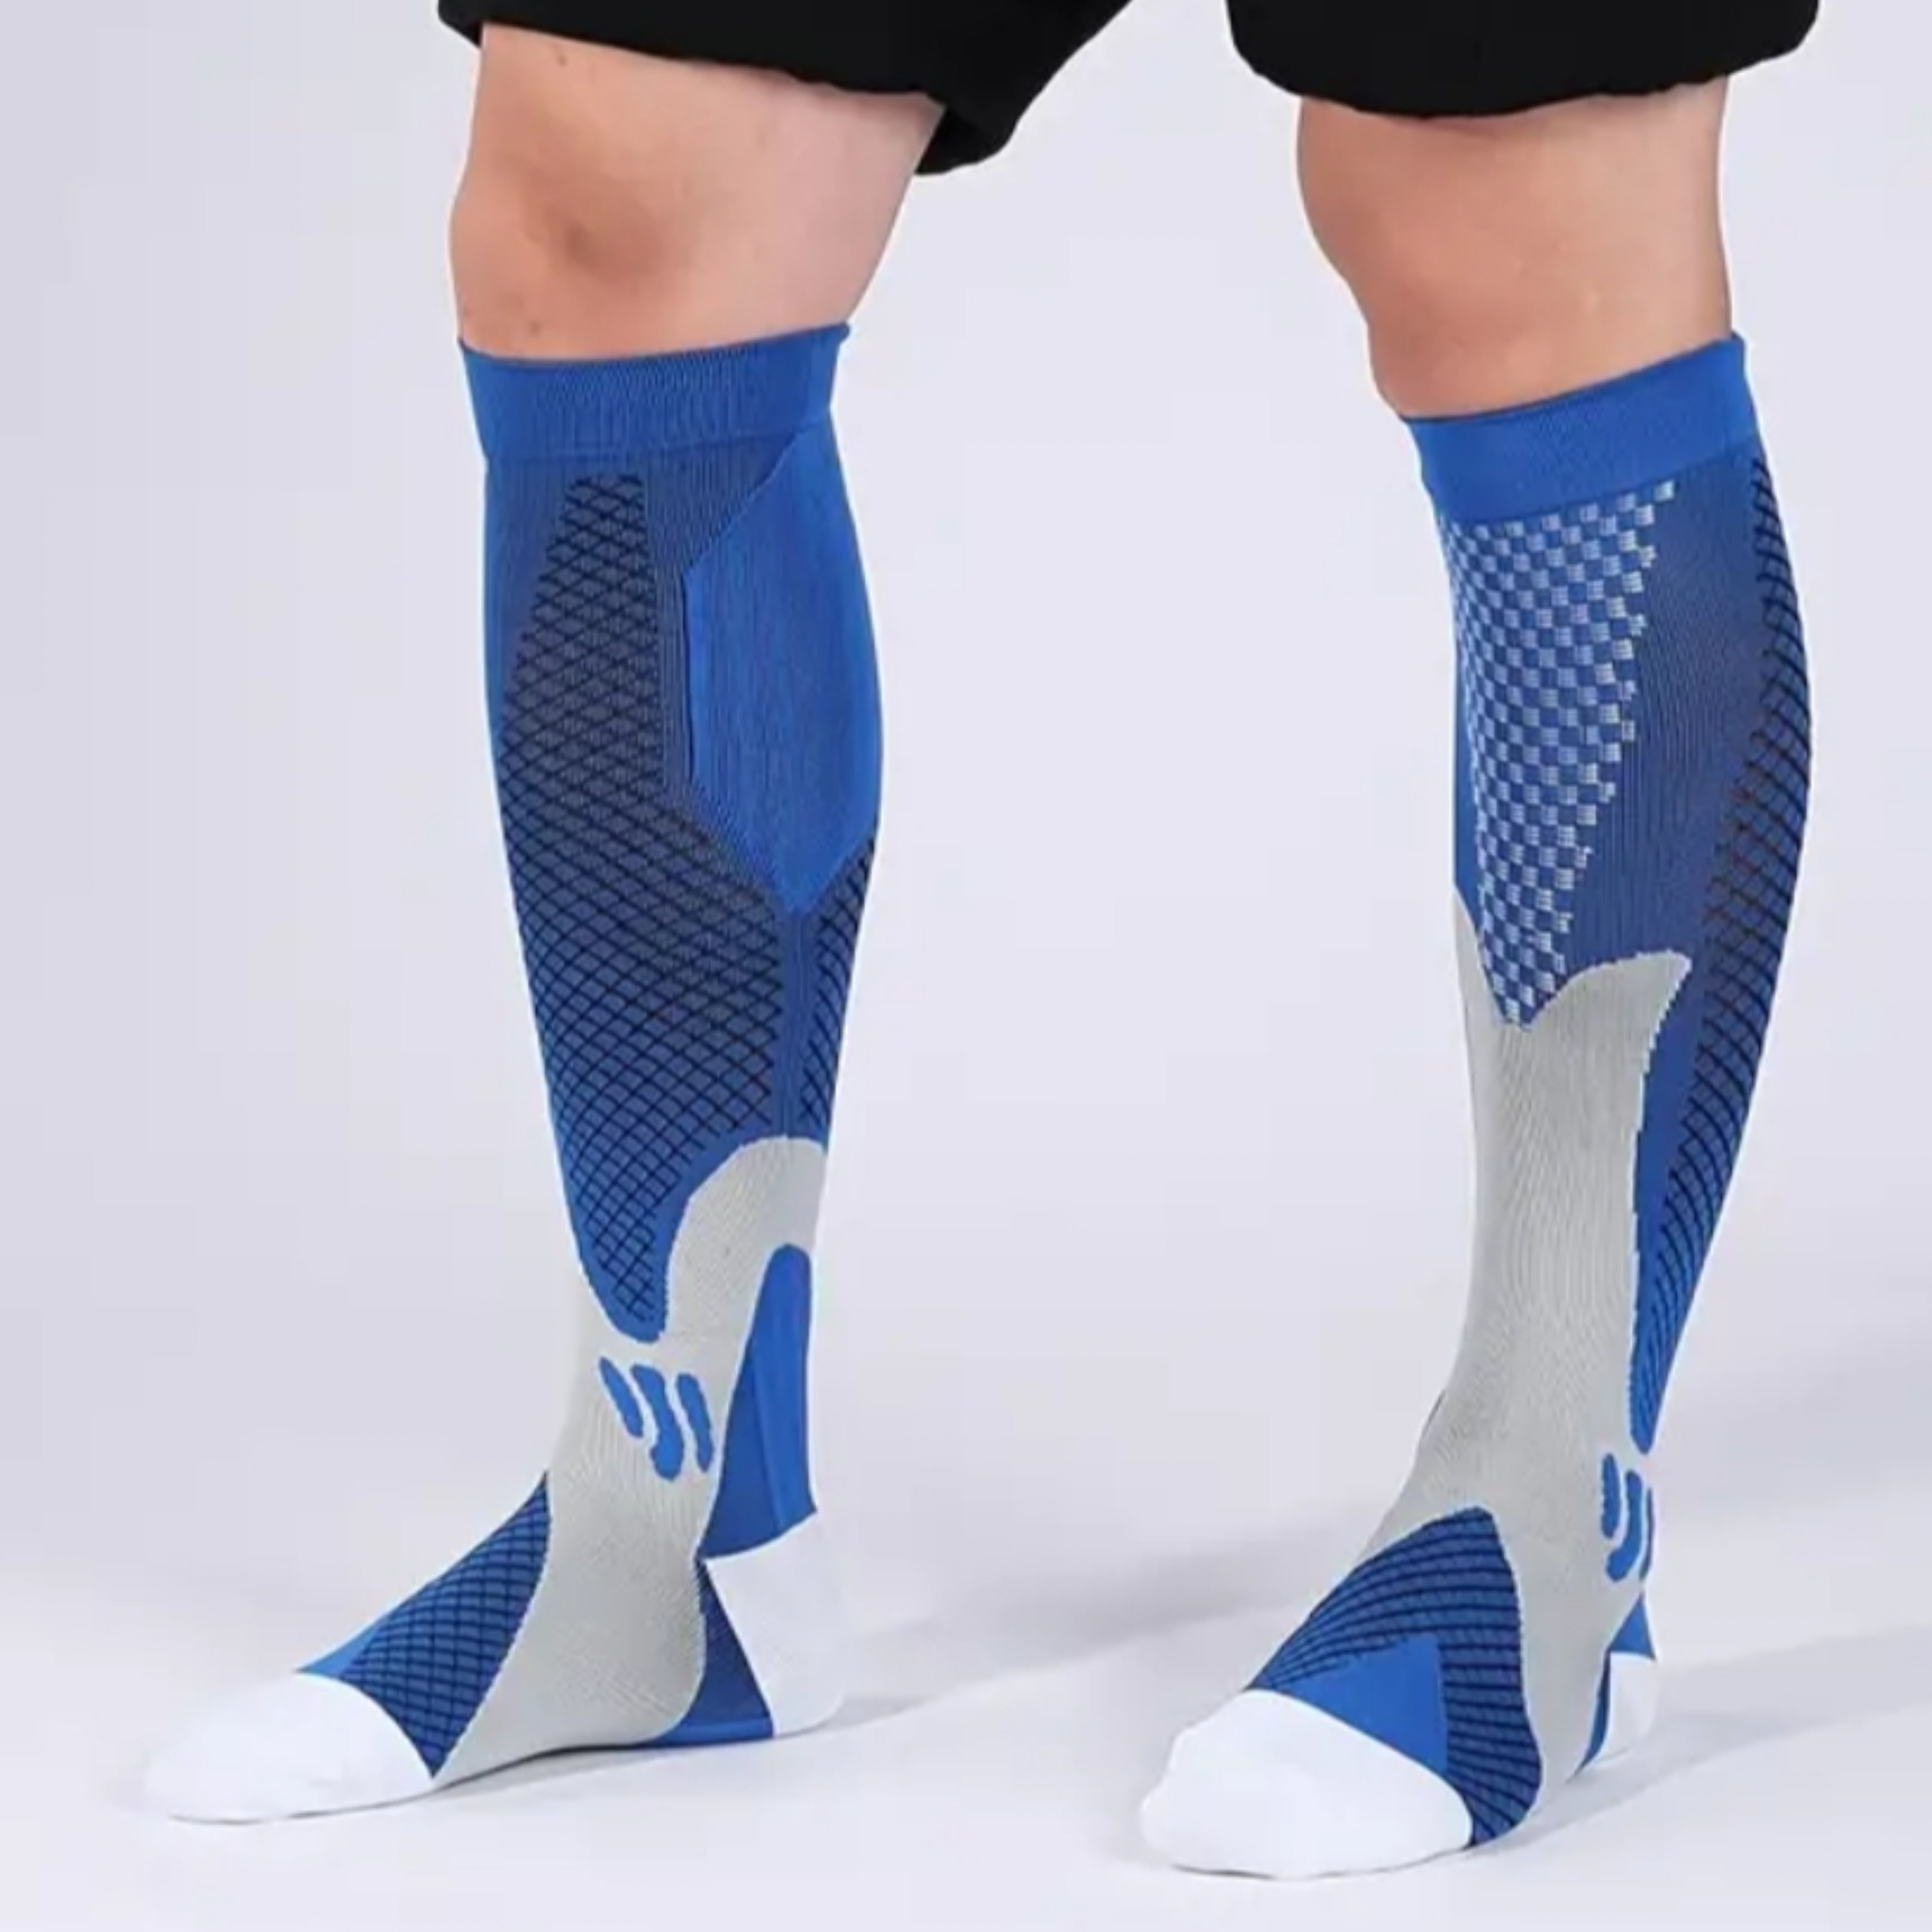 compression socks from